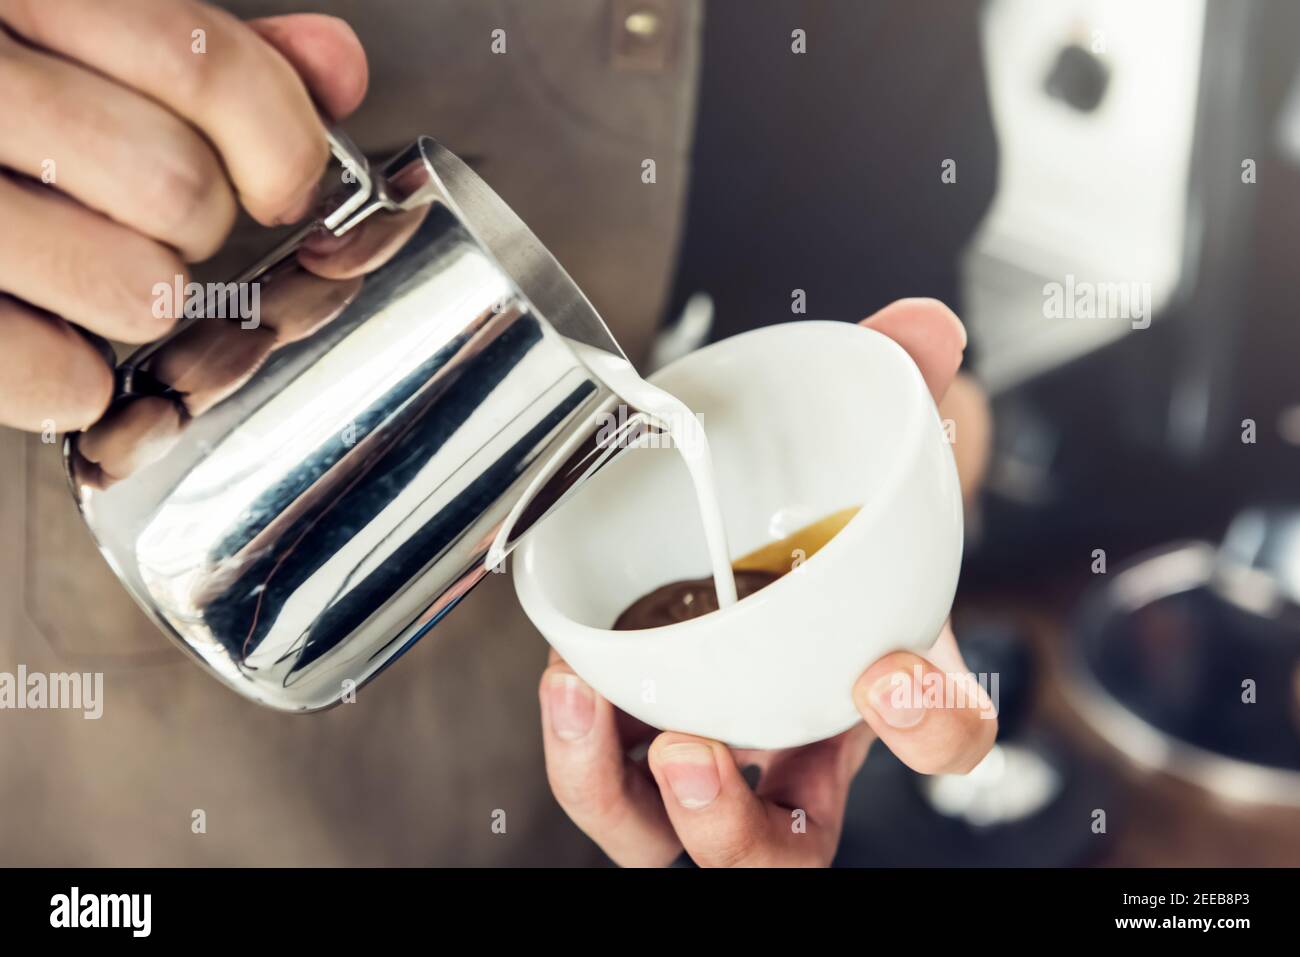 Professional barista pouring steamed milk into coffee cup making latte art Stock Photo